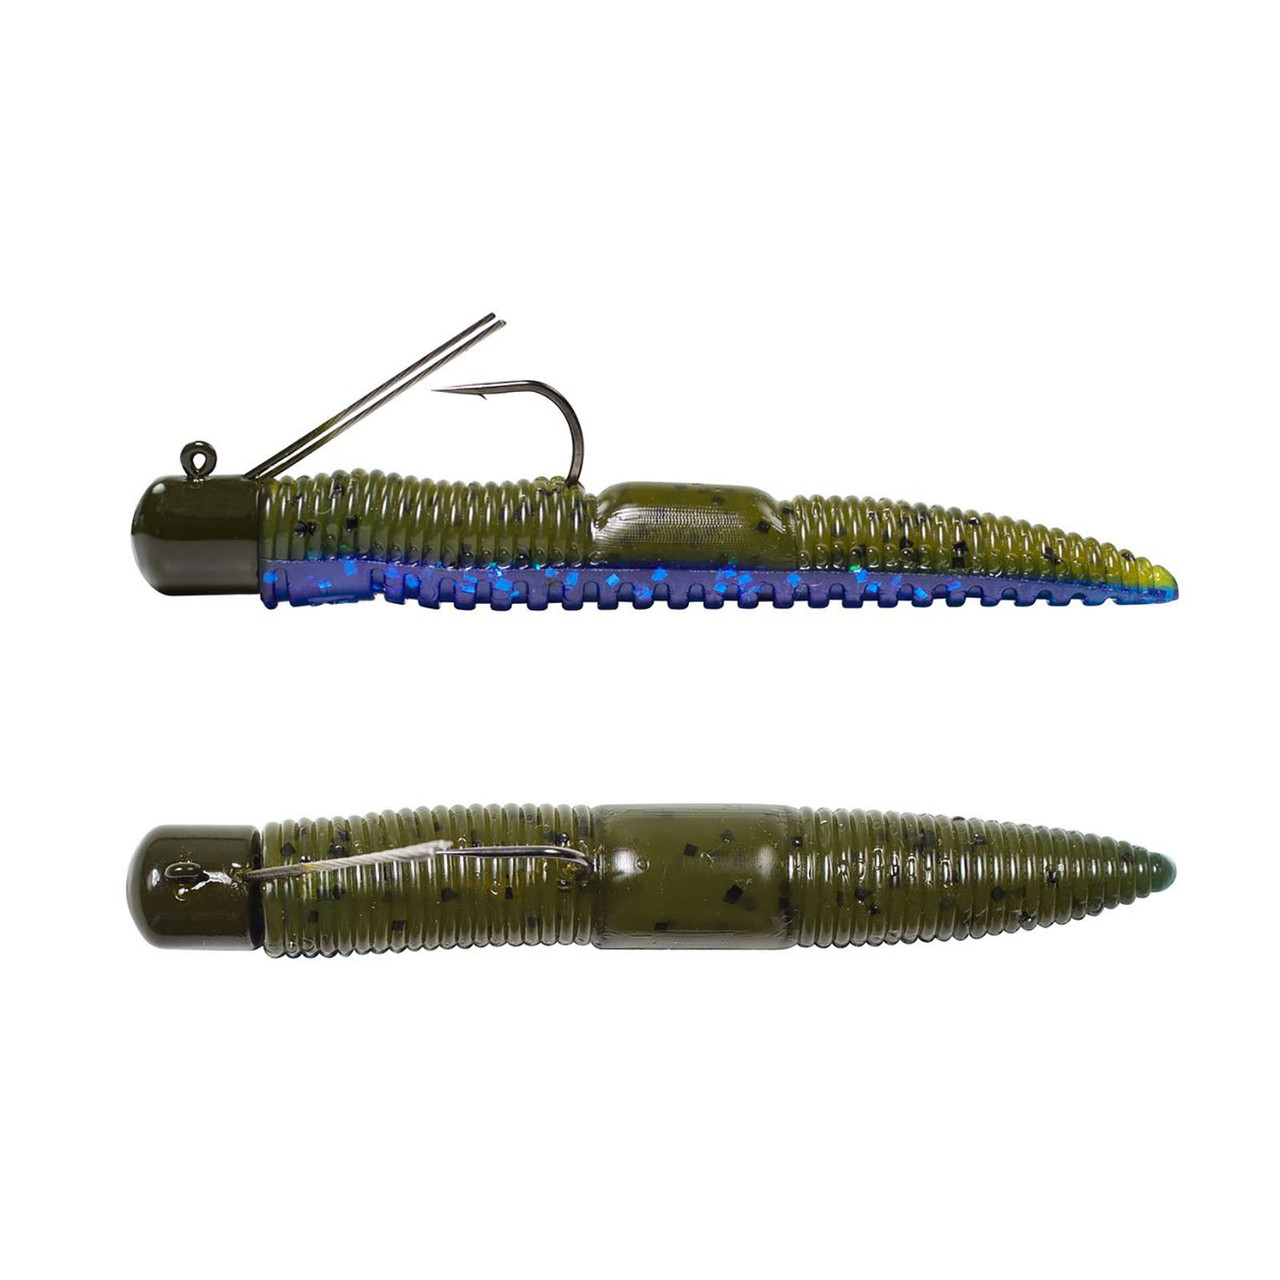 https://cdn11.bigcommerce.com/s-s2ydjd5yv9/images/stencil/1280x1280/products/8291/46592/F18276_Pre_Rigged_Finesse_Worm_Okeechobee_Craw__14687.1704391177.jpg?c=1